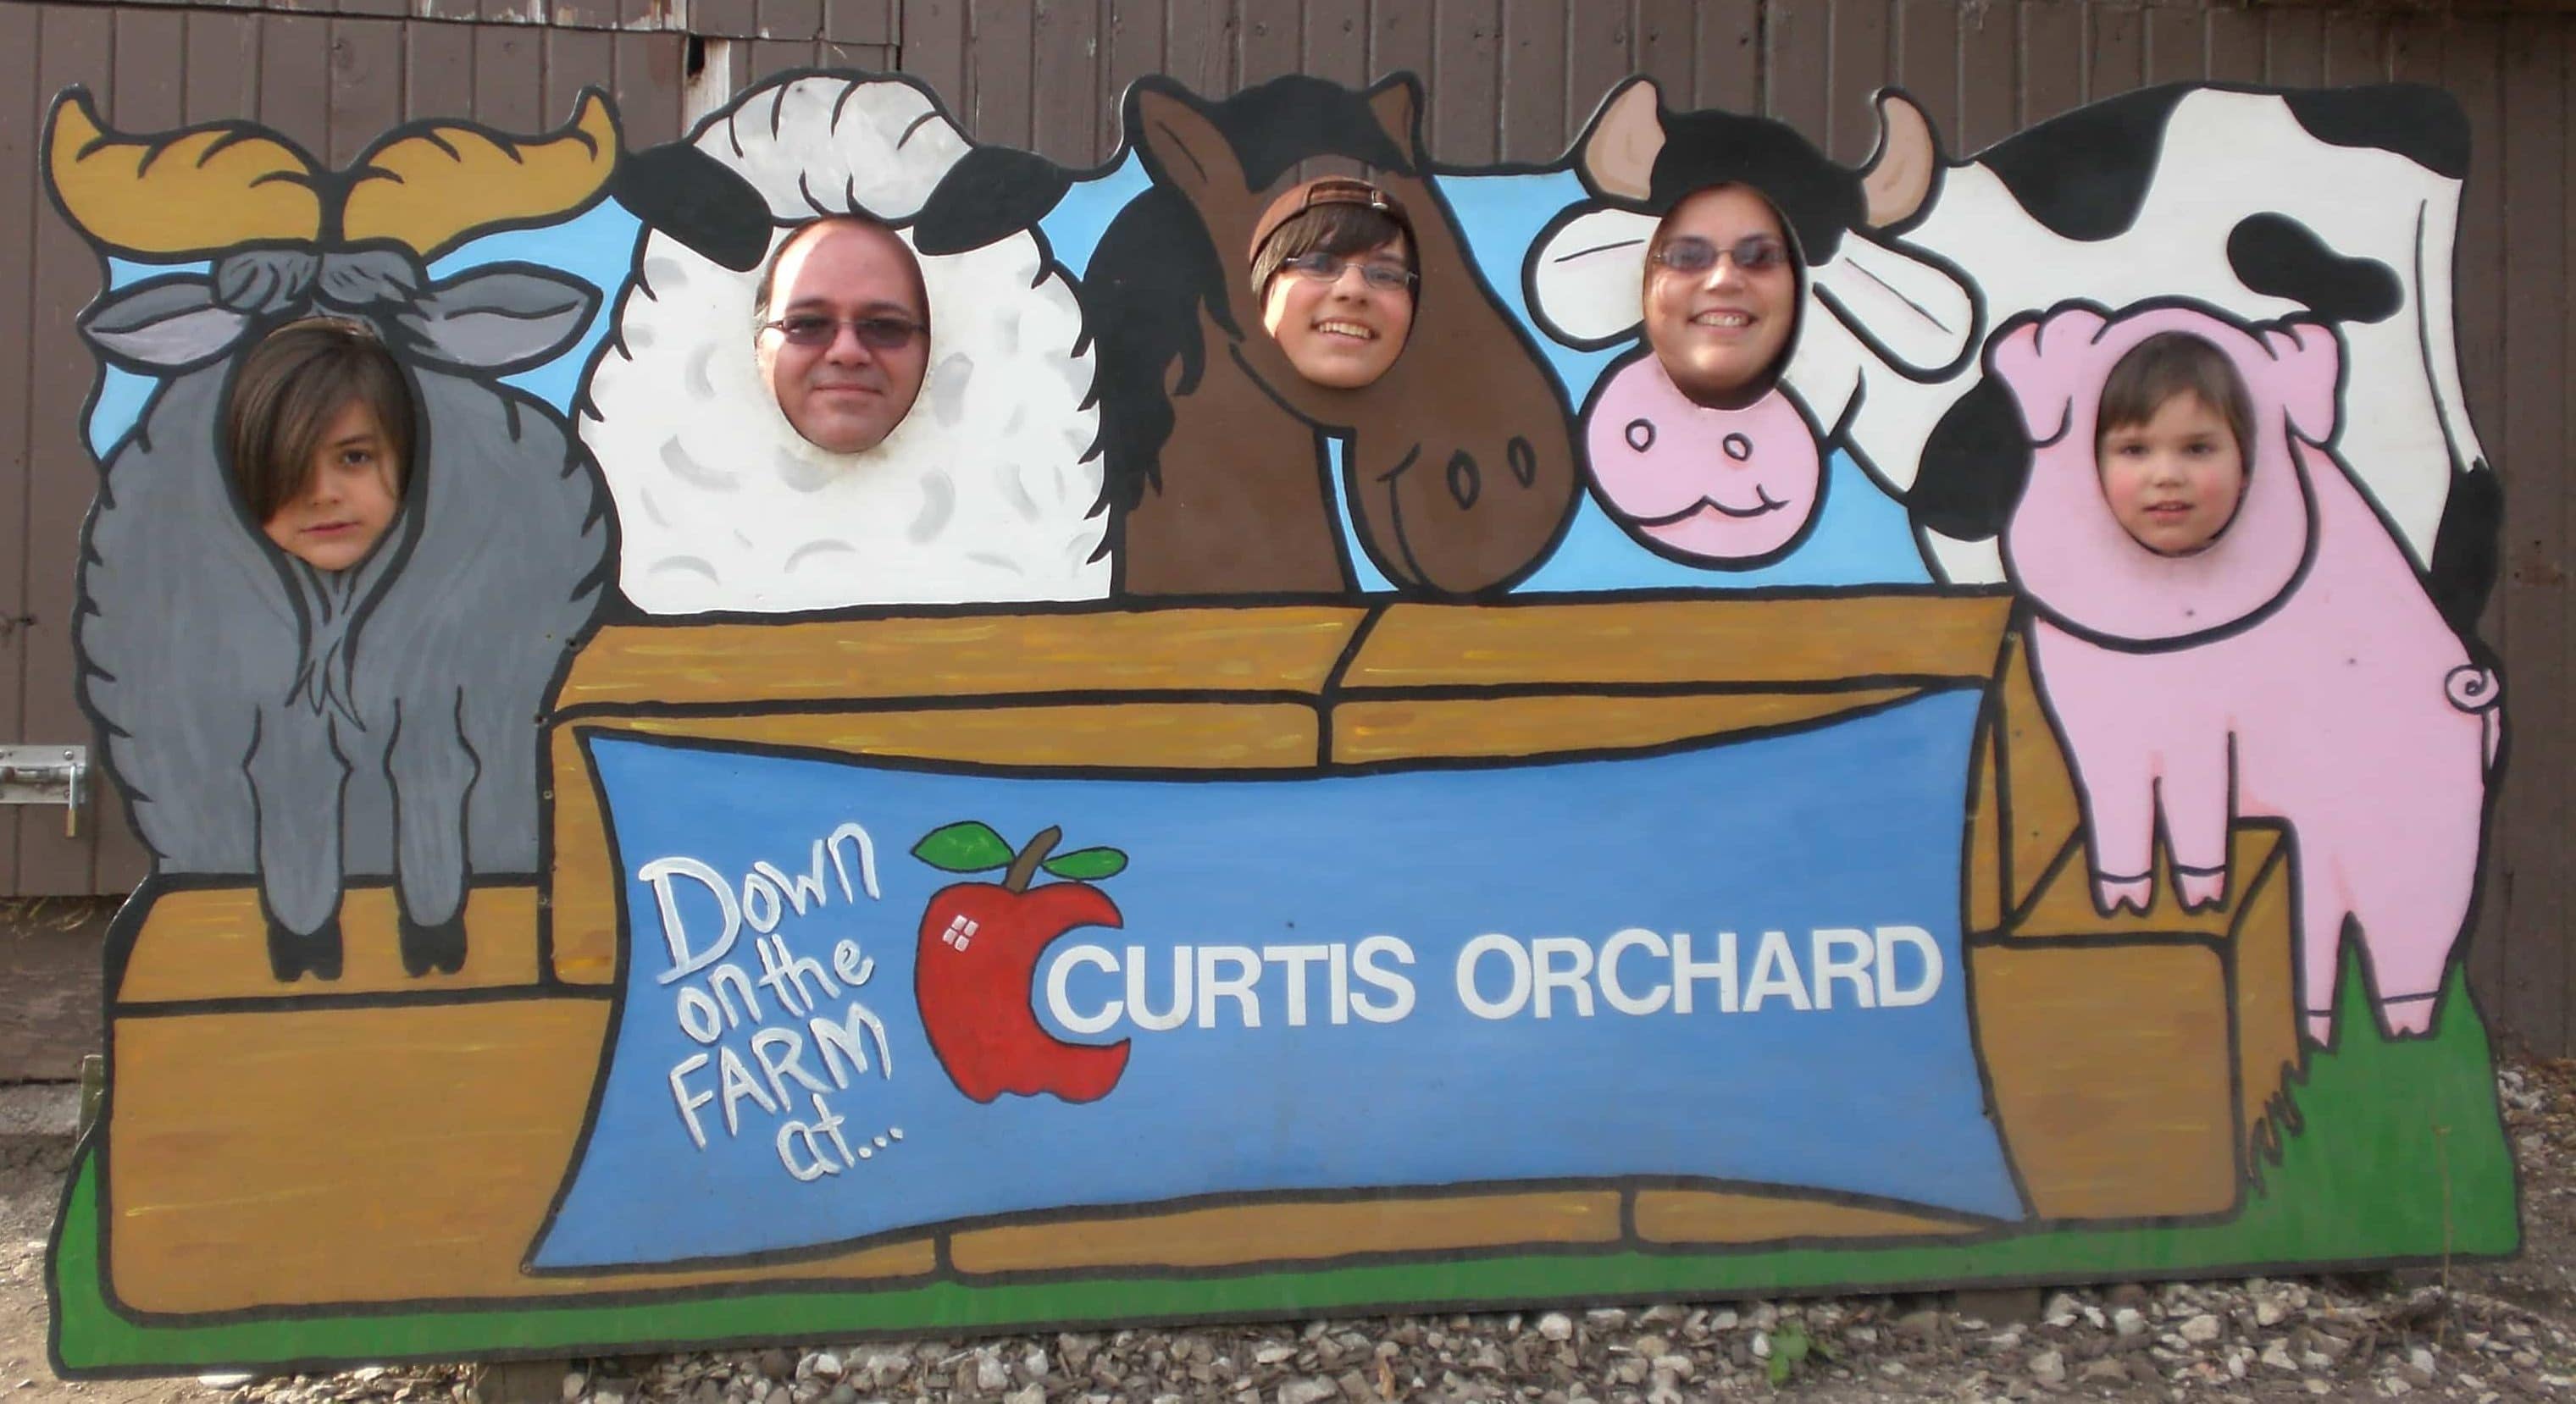 Cerezo family at Curtis Orchard